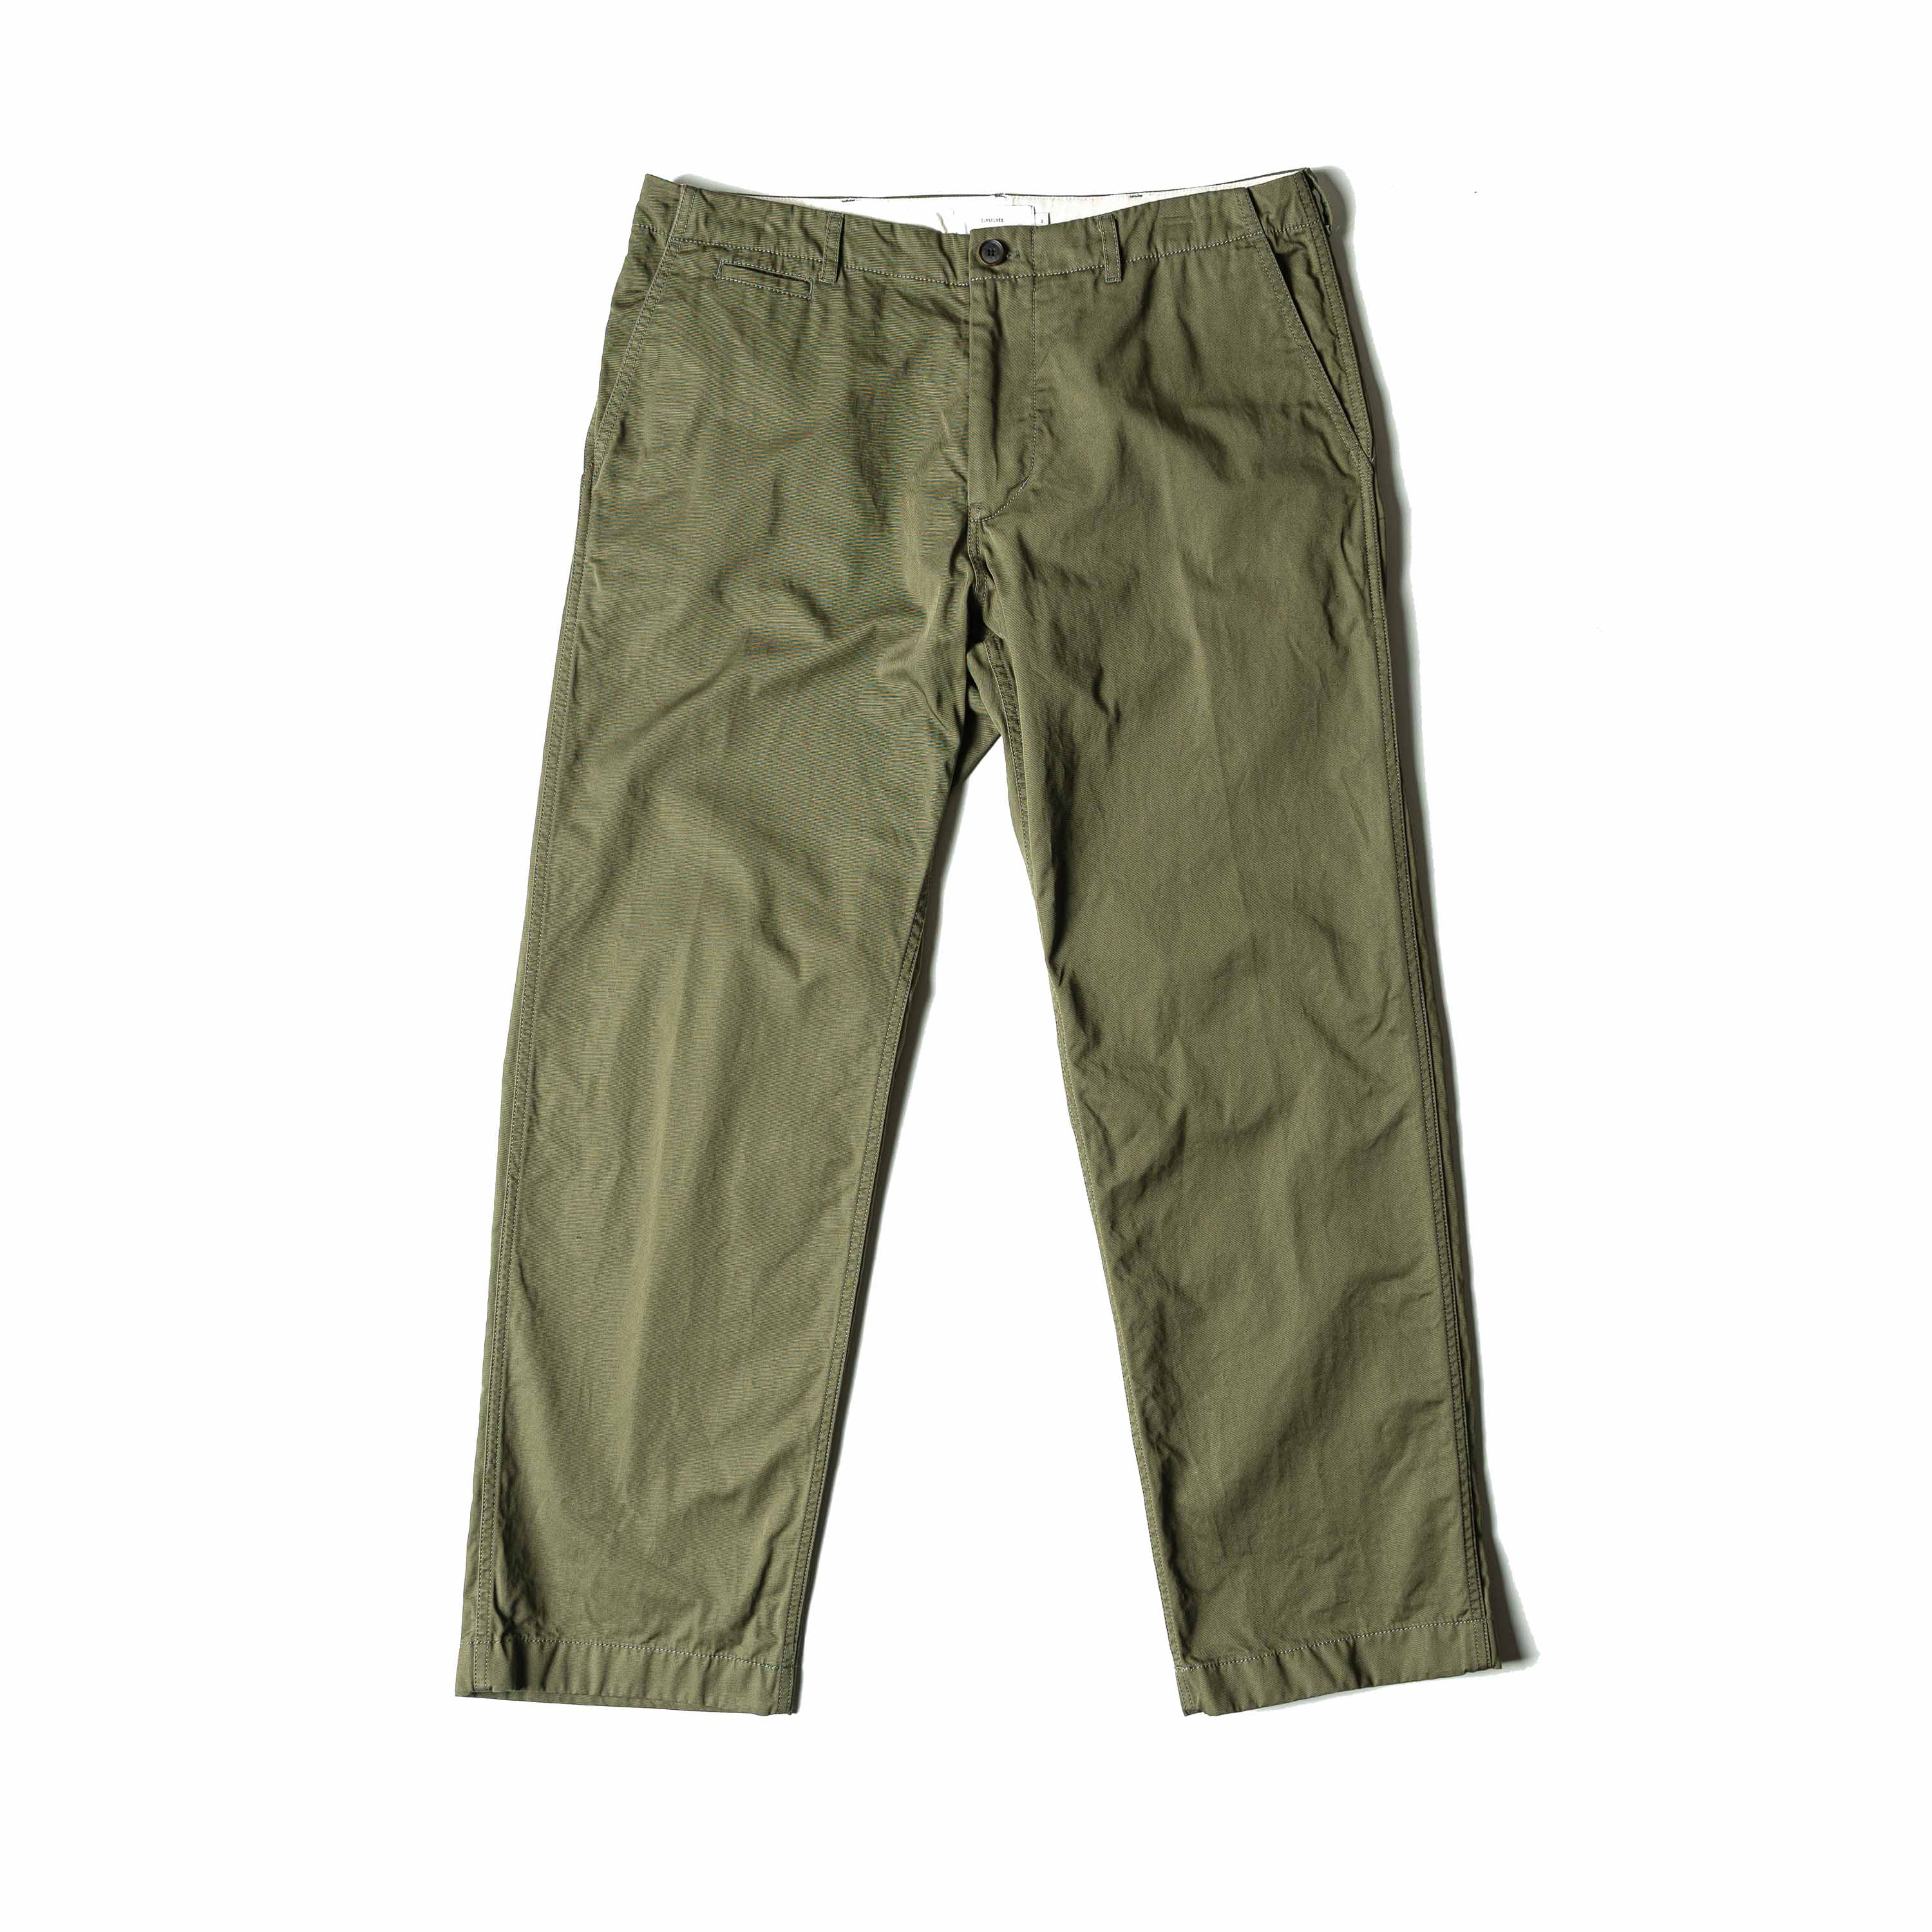 VINTAGE COTTON RELAXED CHINO PANTS - OLIVE